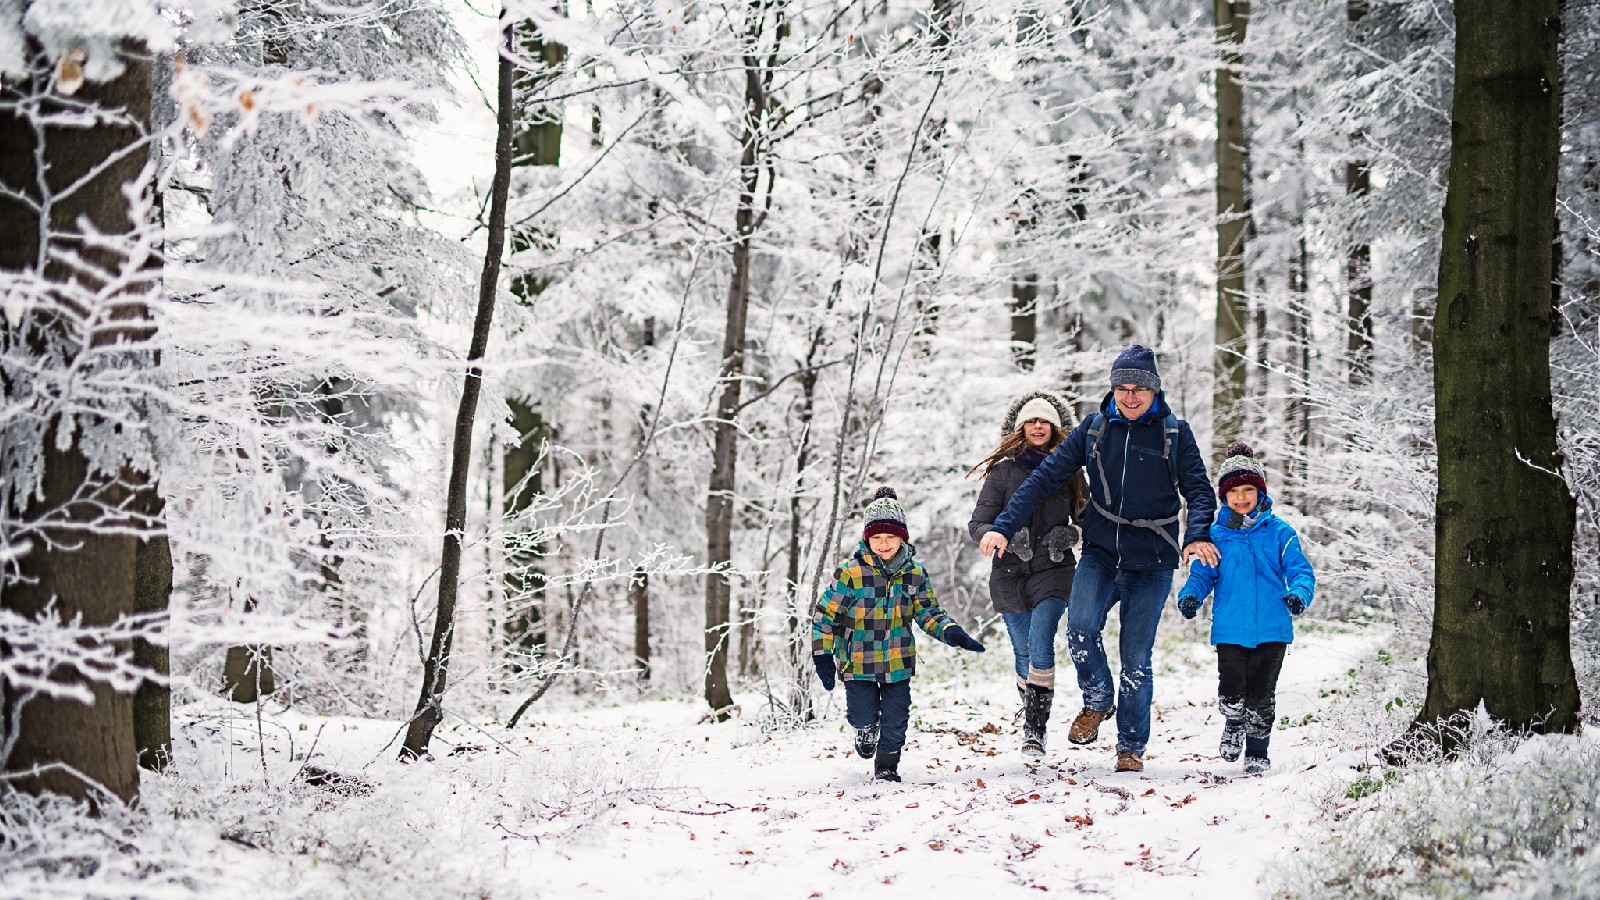 Father with three kids running in beautiful winter forest. The little girl is aged 10 and her brothers are aged 7. Cold winter day